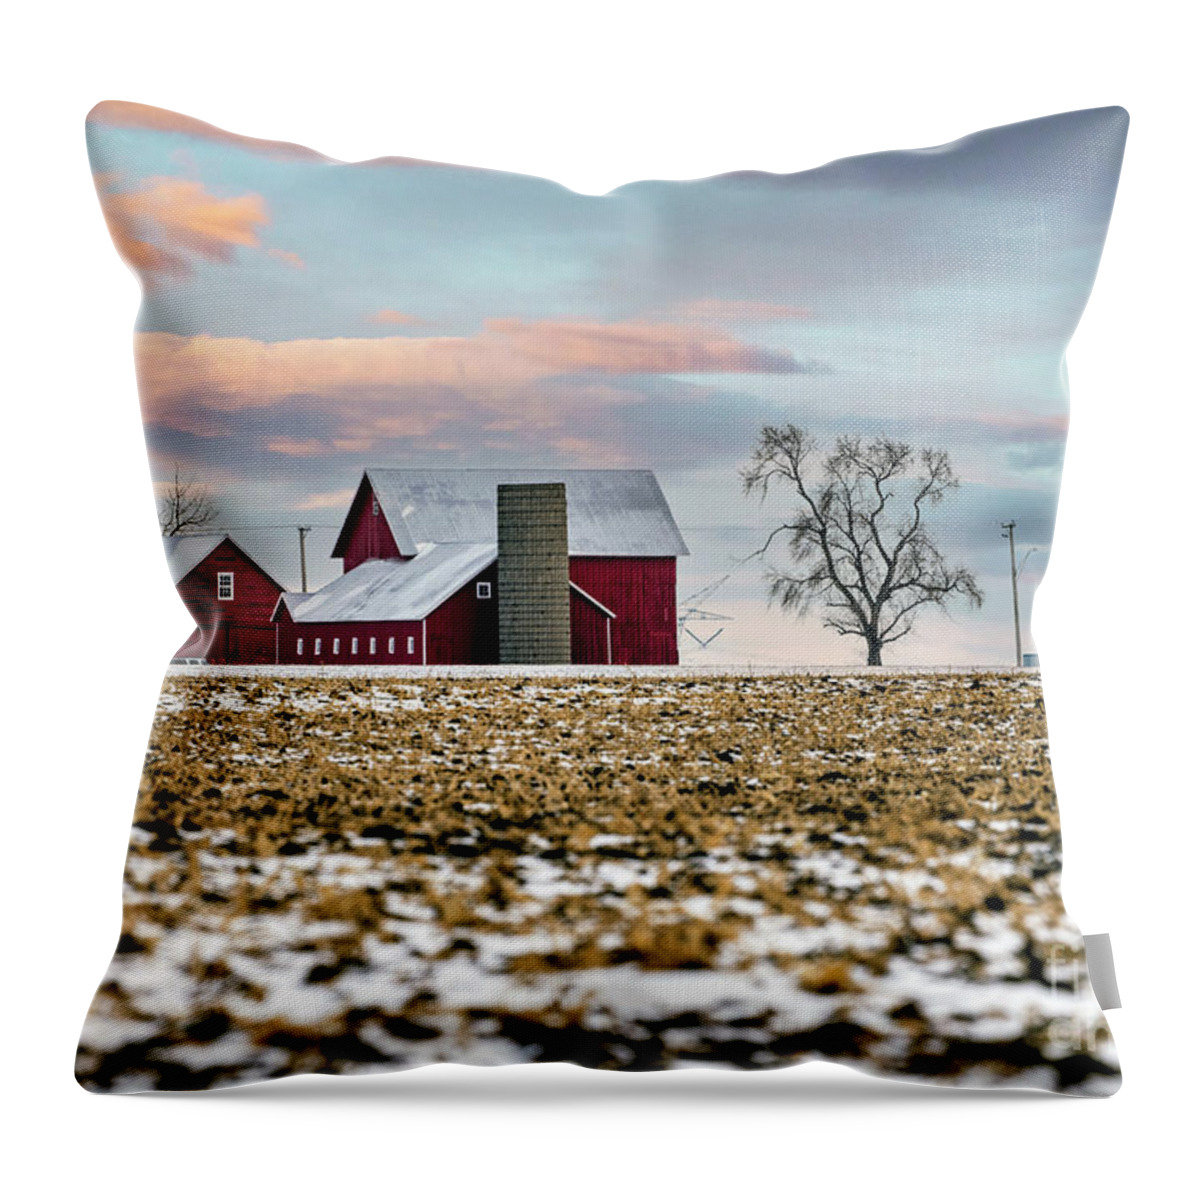 Illinois Farm Throw Pillow featuring the photograph Illinois Farm with Canada Geese in the Corn Field by Sandra Rust